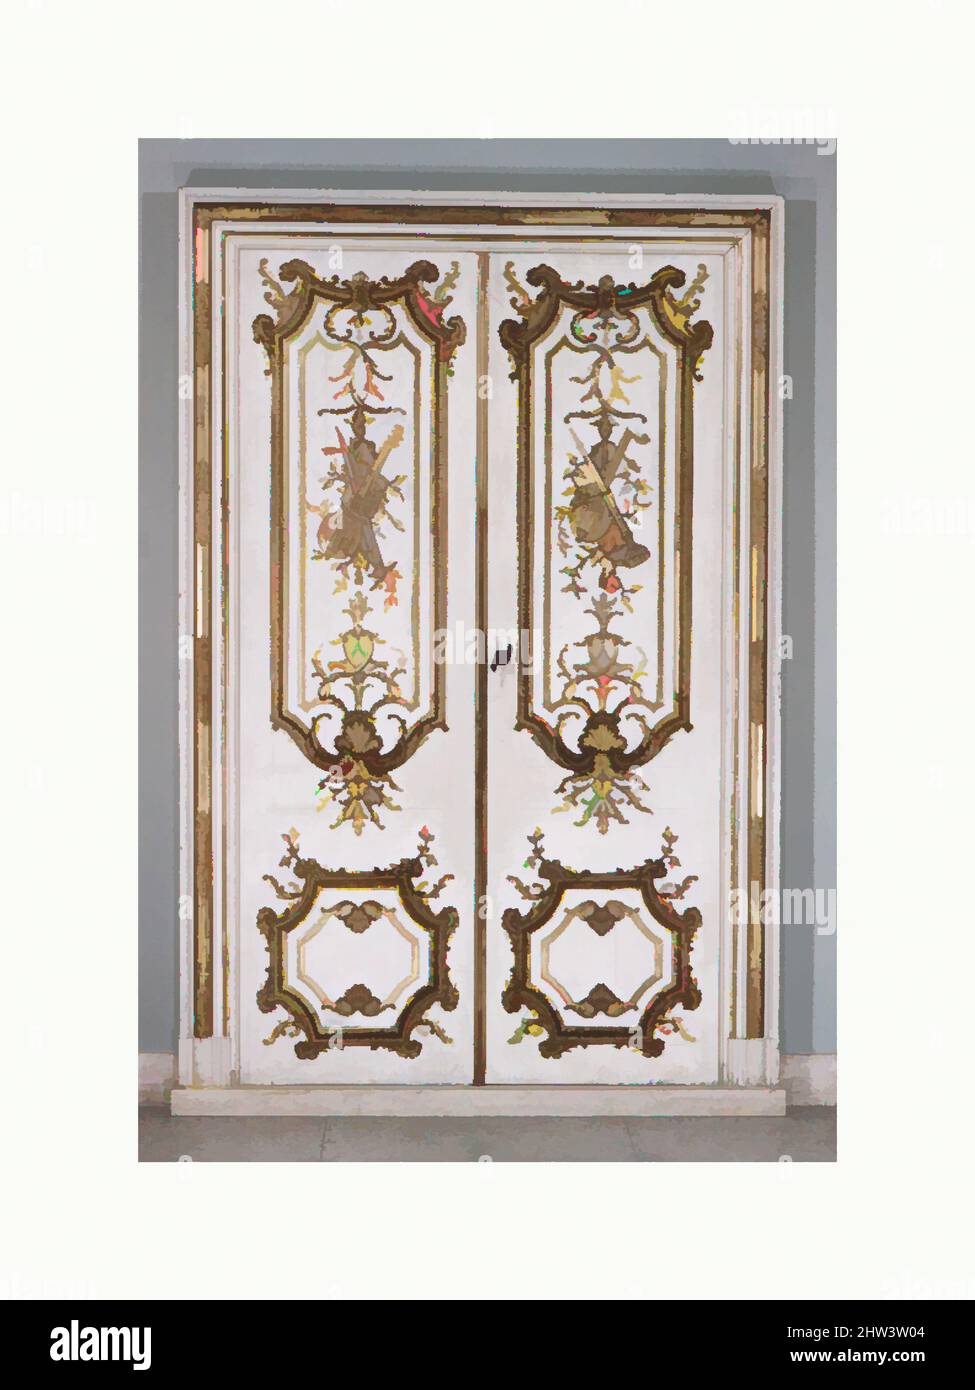 Art inspired by Four doors with trims and one set of entre-portes, Jean François Cuvilliés the Elder (German (born Belgian), Soignies 1695–1768 Munich), ca. 1730–35, Southern German, Munich, Wood, painted, carved and gilded, Overall (each): 95 × 29 in. (241.3 × 73.7 cm), Woodwork, Jean, Classic works modernized by Artotop with a splash of modernity. Shapes, color and value, eye-catching visual impact on art. Emotions through freedom of artworks in a contemporary way. A timeless message pursuing a wildly creative new direction. Artists turning to the digital medium and creating the Artotop NFT Stock Photo